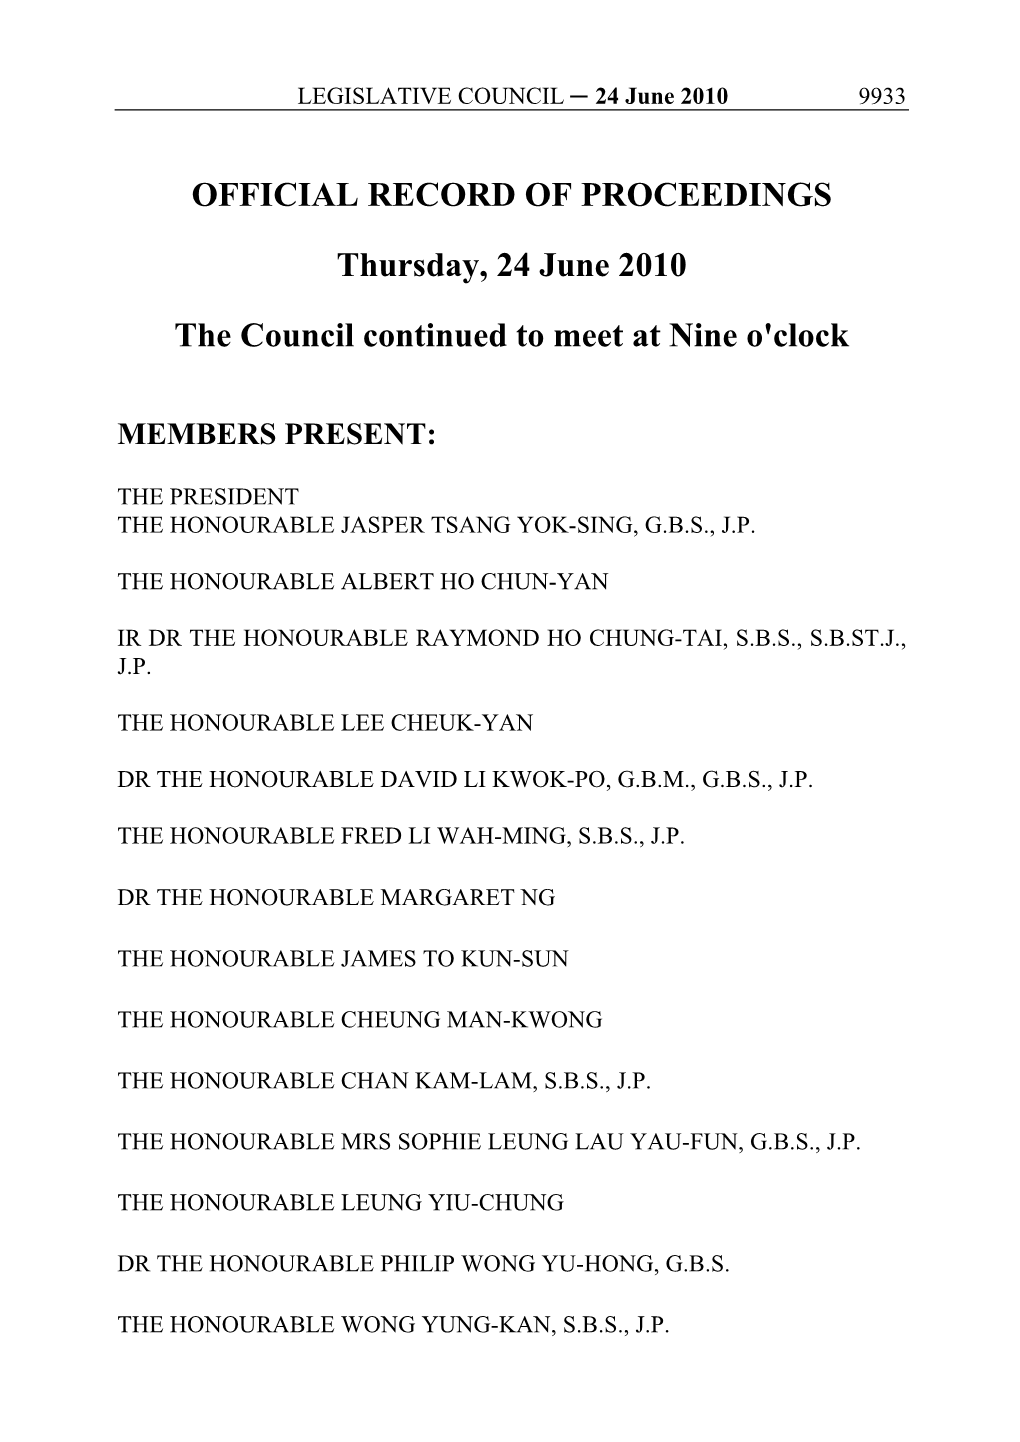 OFFICIAL RECORD of PROCEEDINGS Thursday, 24 June 2010 the Council Continued to Meet at Nine O'clock